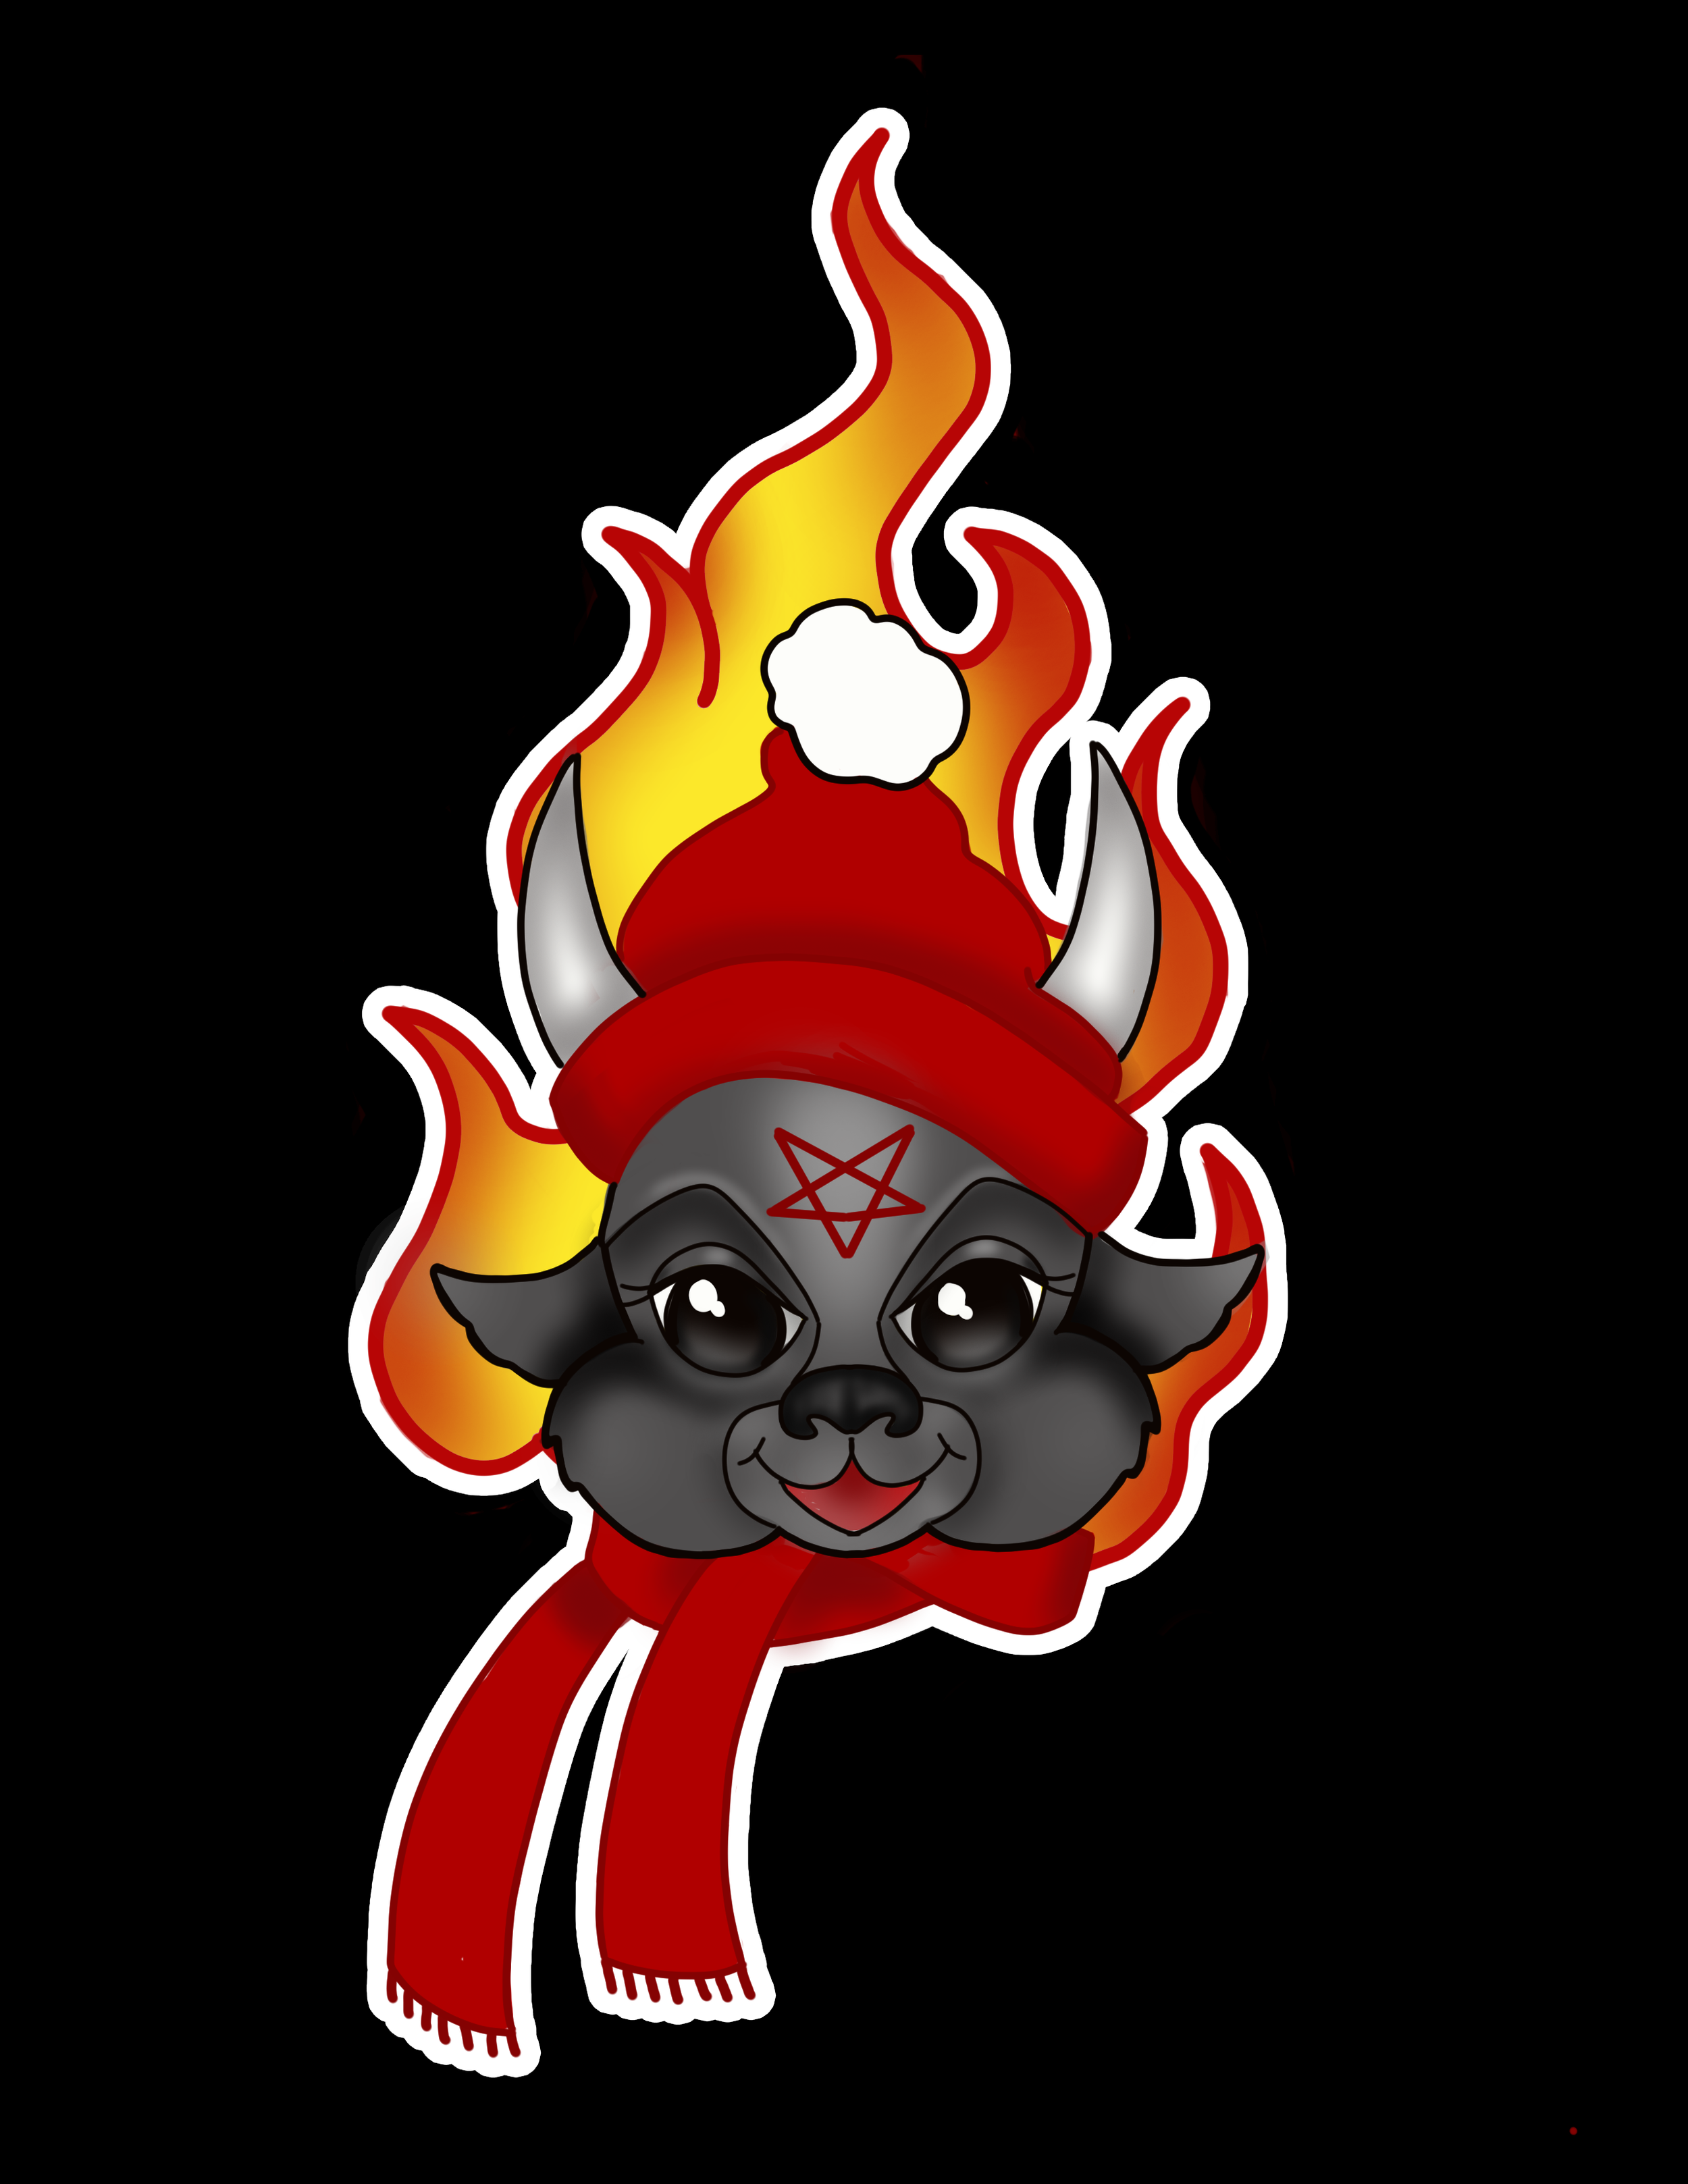 hotter than hell animated clipart